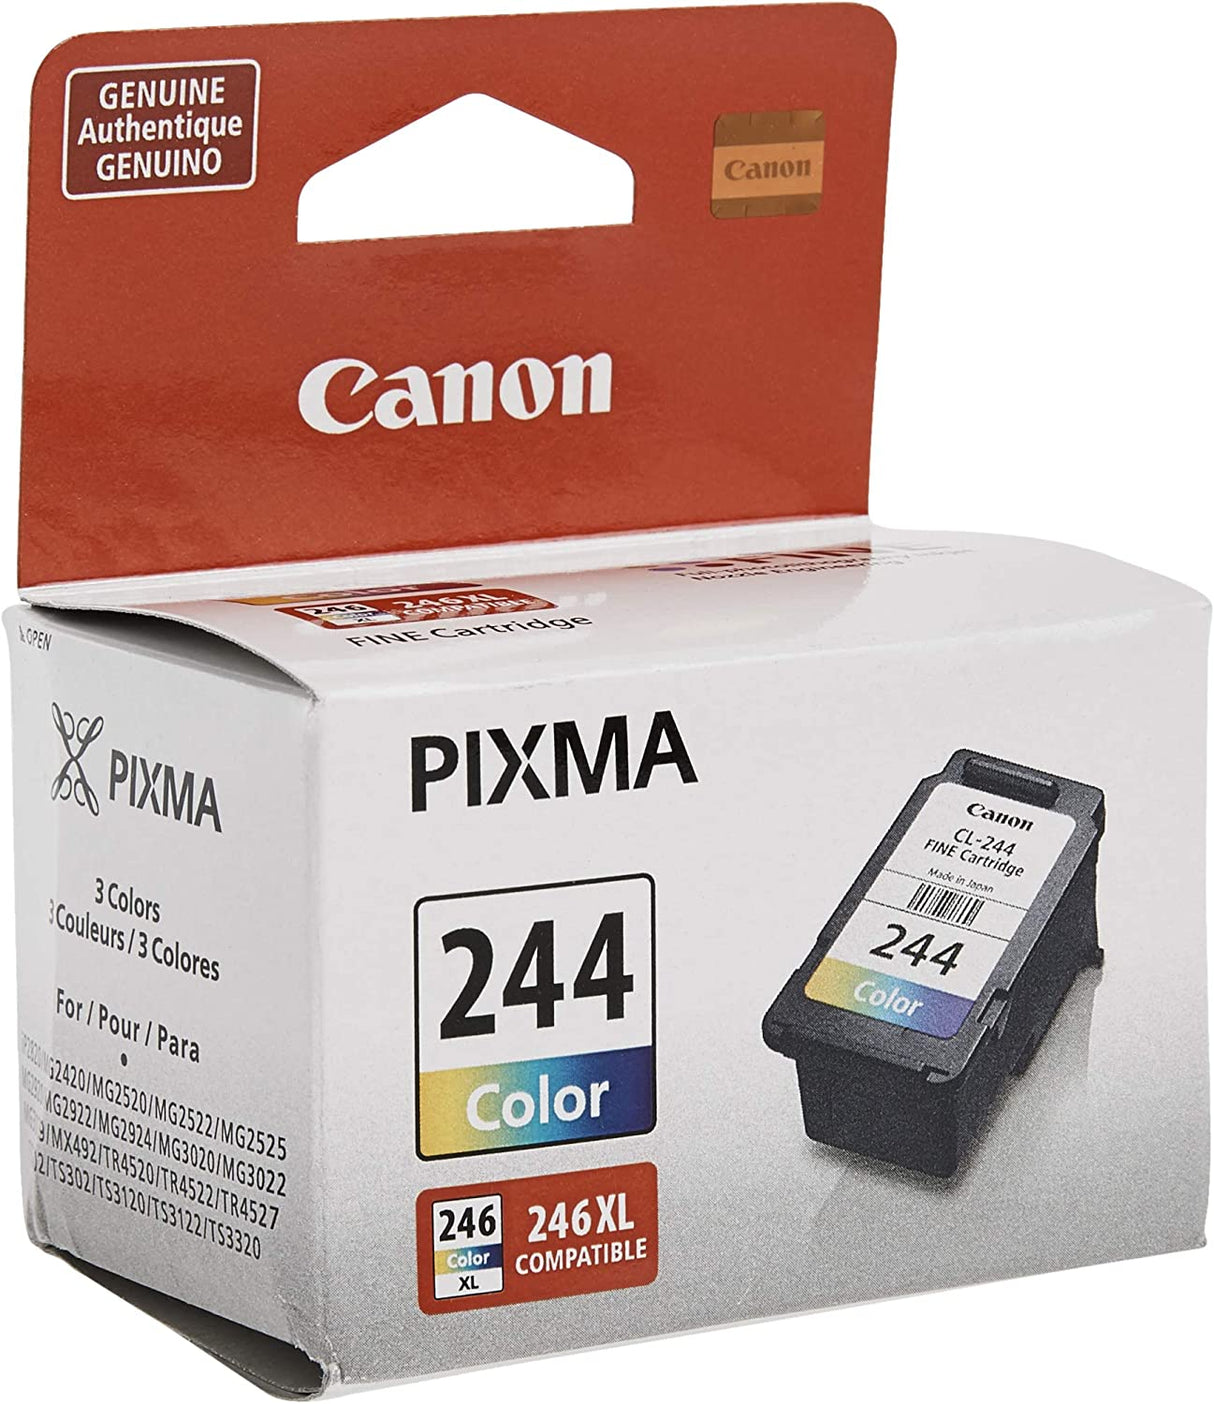 Canon CL-244 Compatible to MG2525,MG3020,TR4520/4522,TS202,TS302,TS3120/3122,TS3320/3322 Printers Color Cartridge Color Ink Cartridge Ink